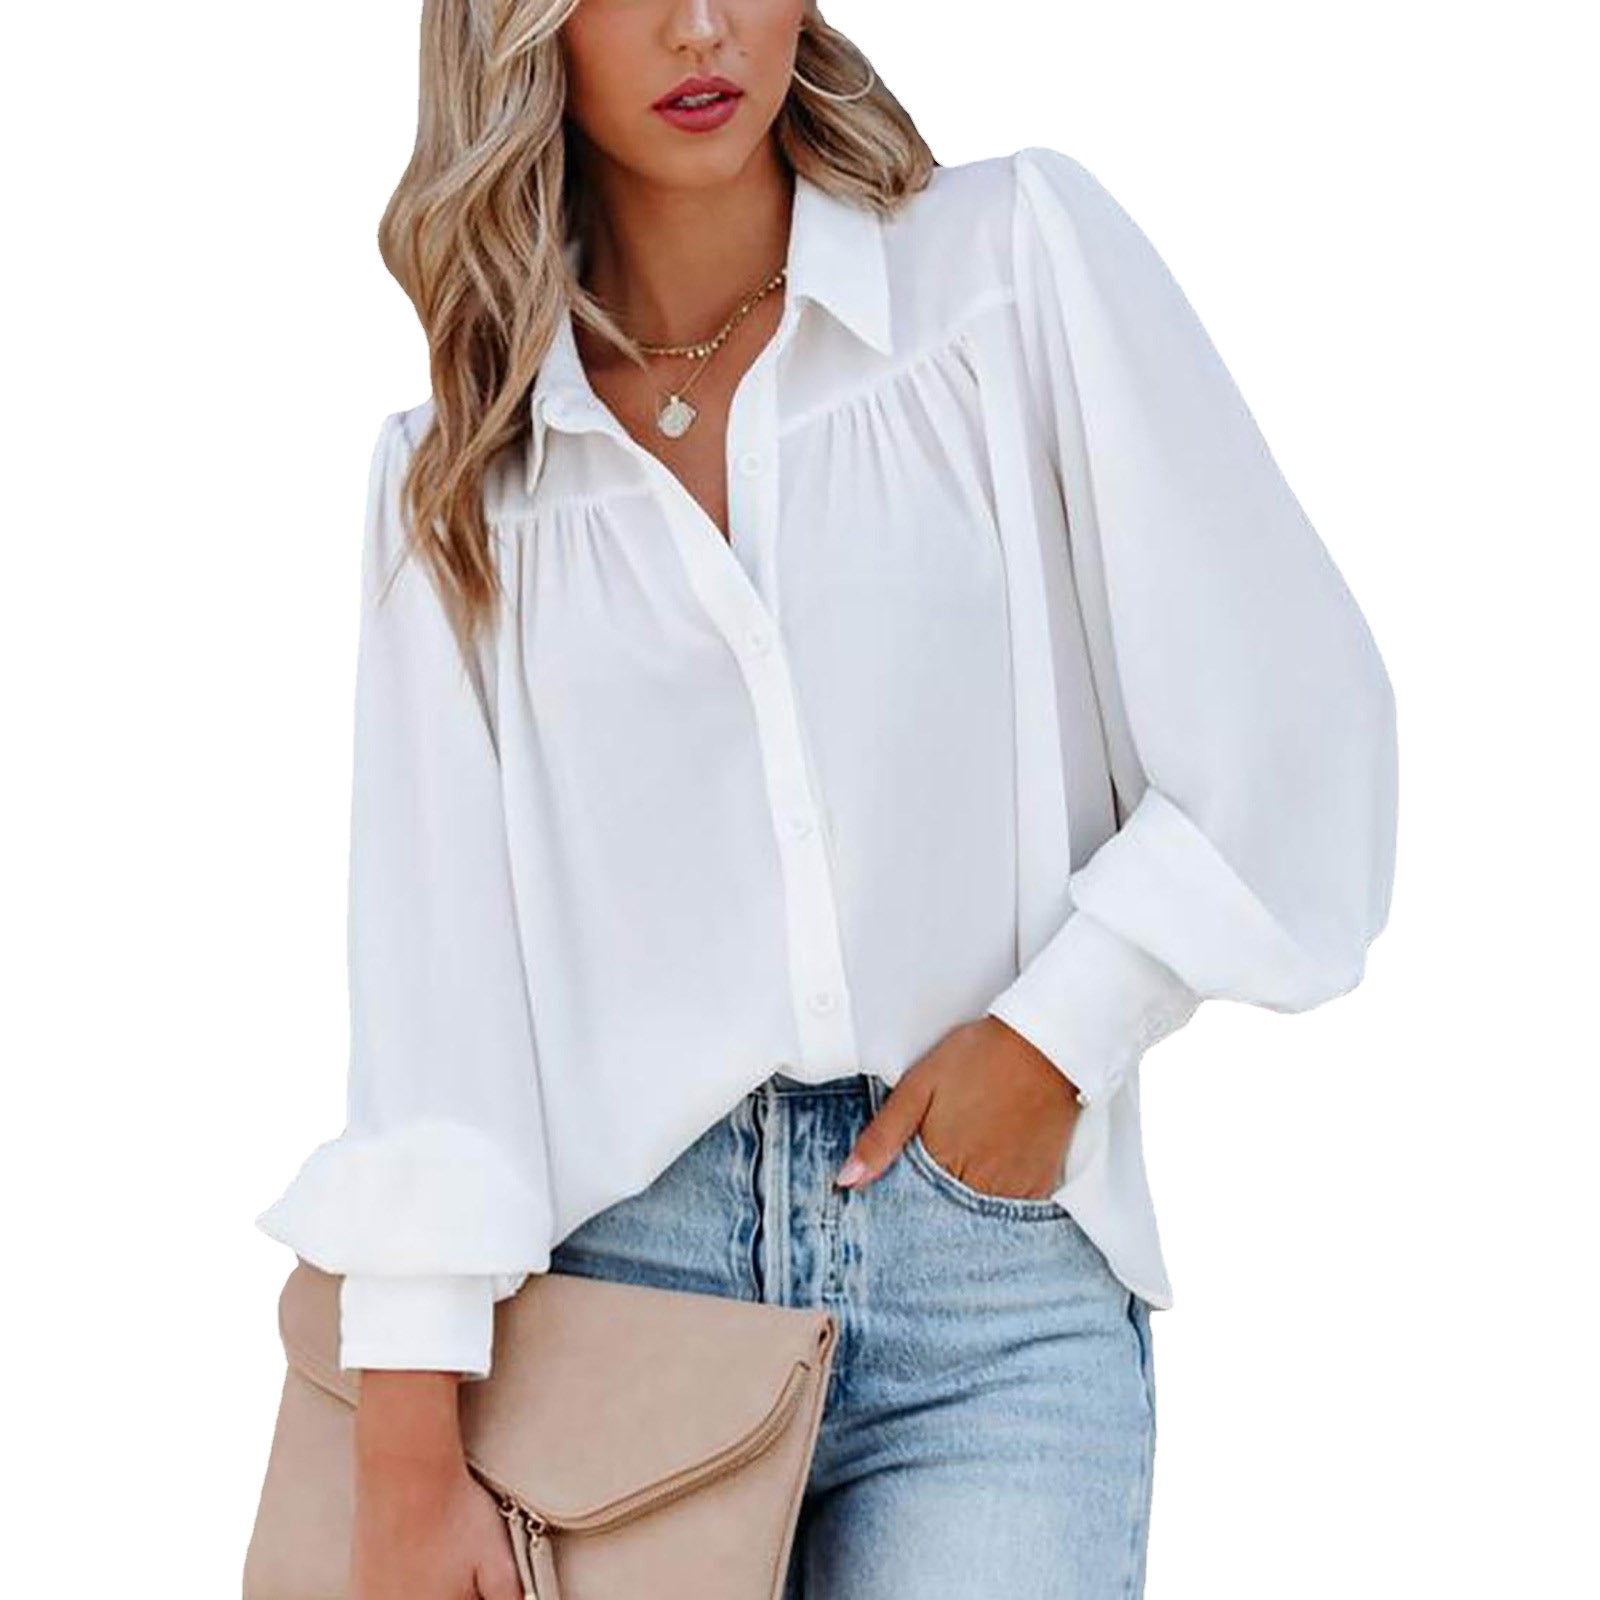 Polyester Button Lantern Sleeve Pleated Solid Color Collar Loose Shirt Long Women's Top